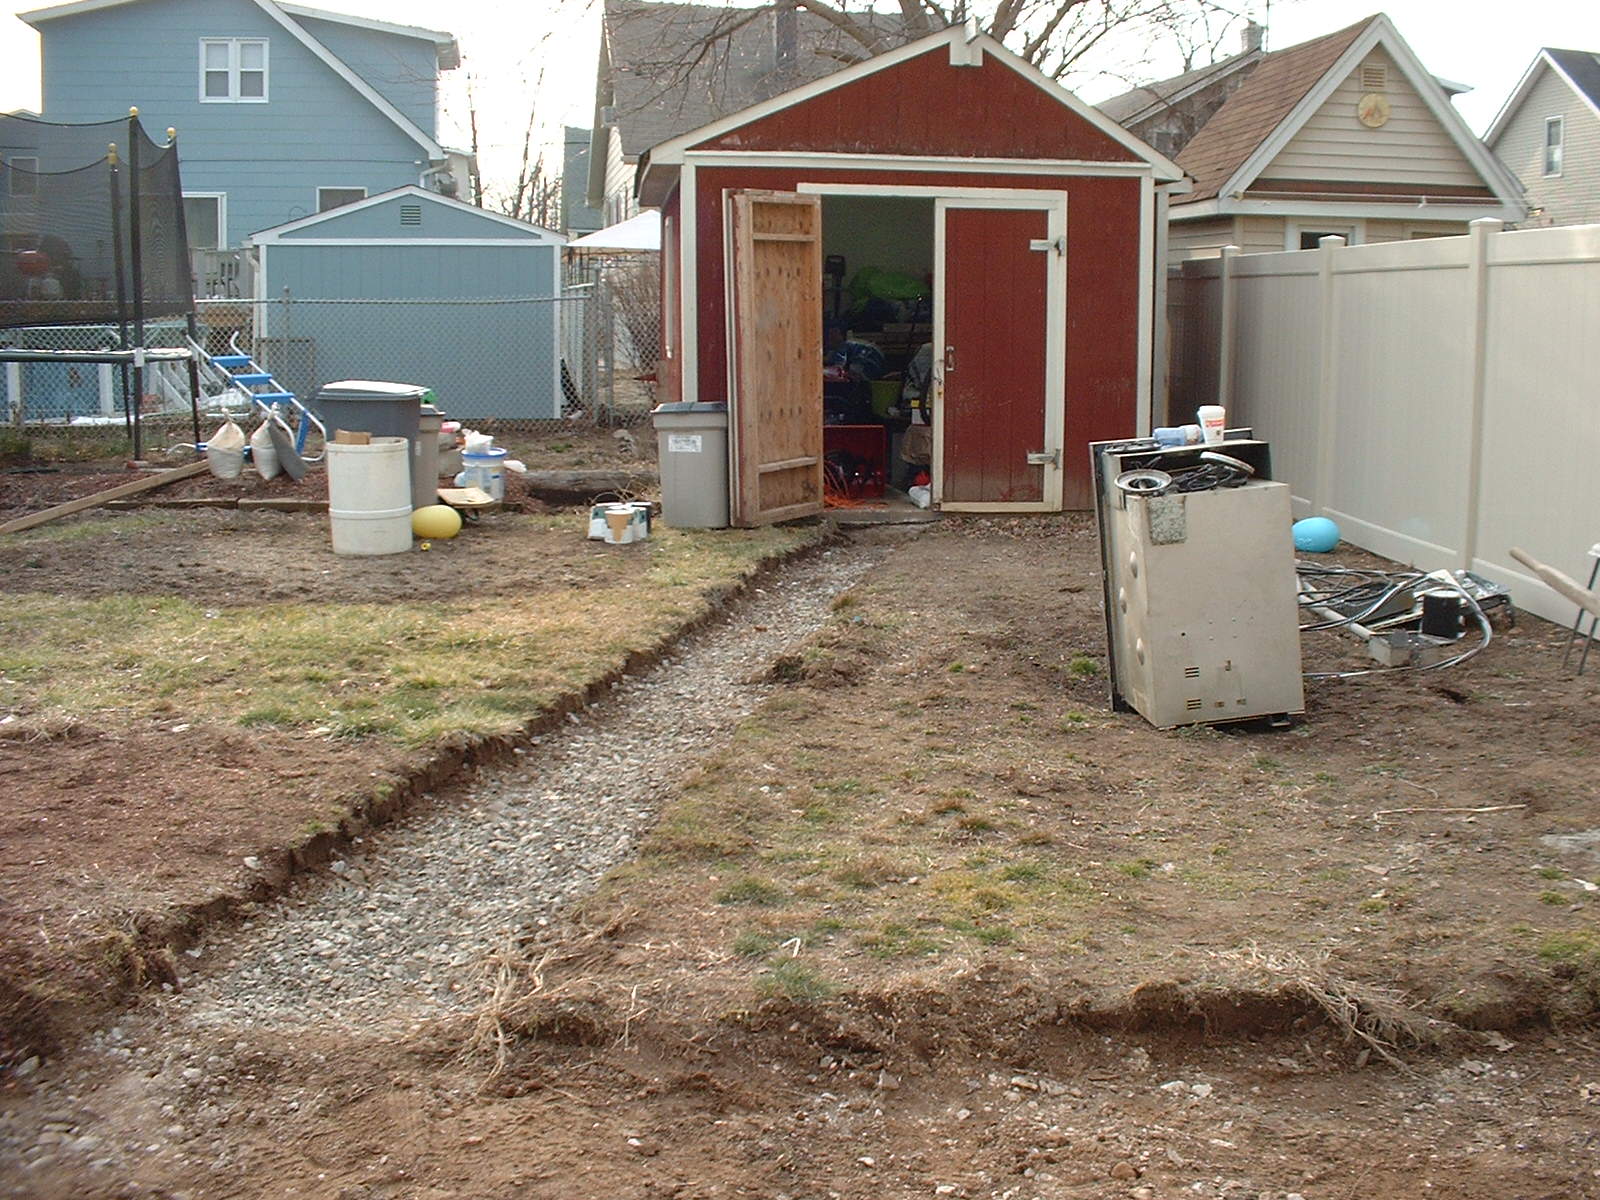 This is after we took out the old concrete walkway to the shed.